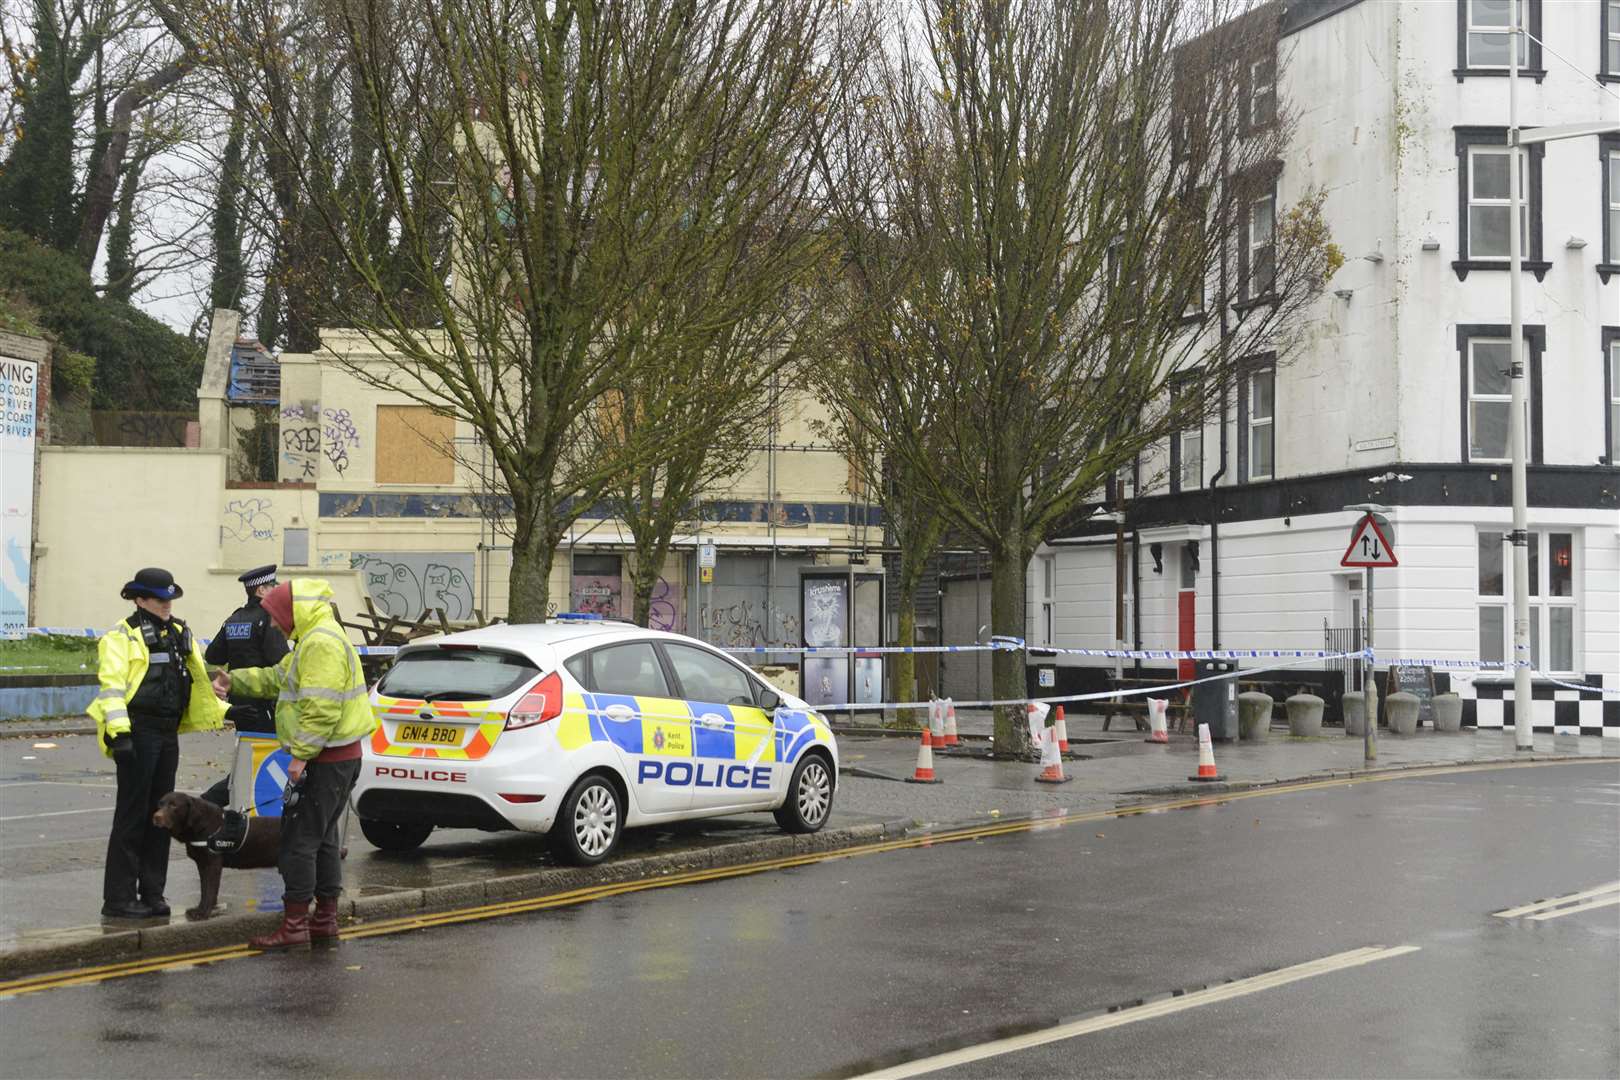 The car park has been cordoned off and police remain at the scene. Picture: Paul Amos